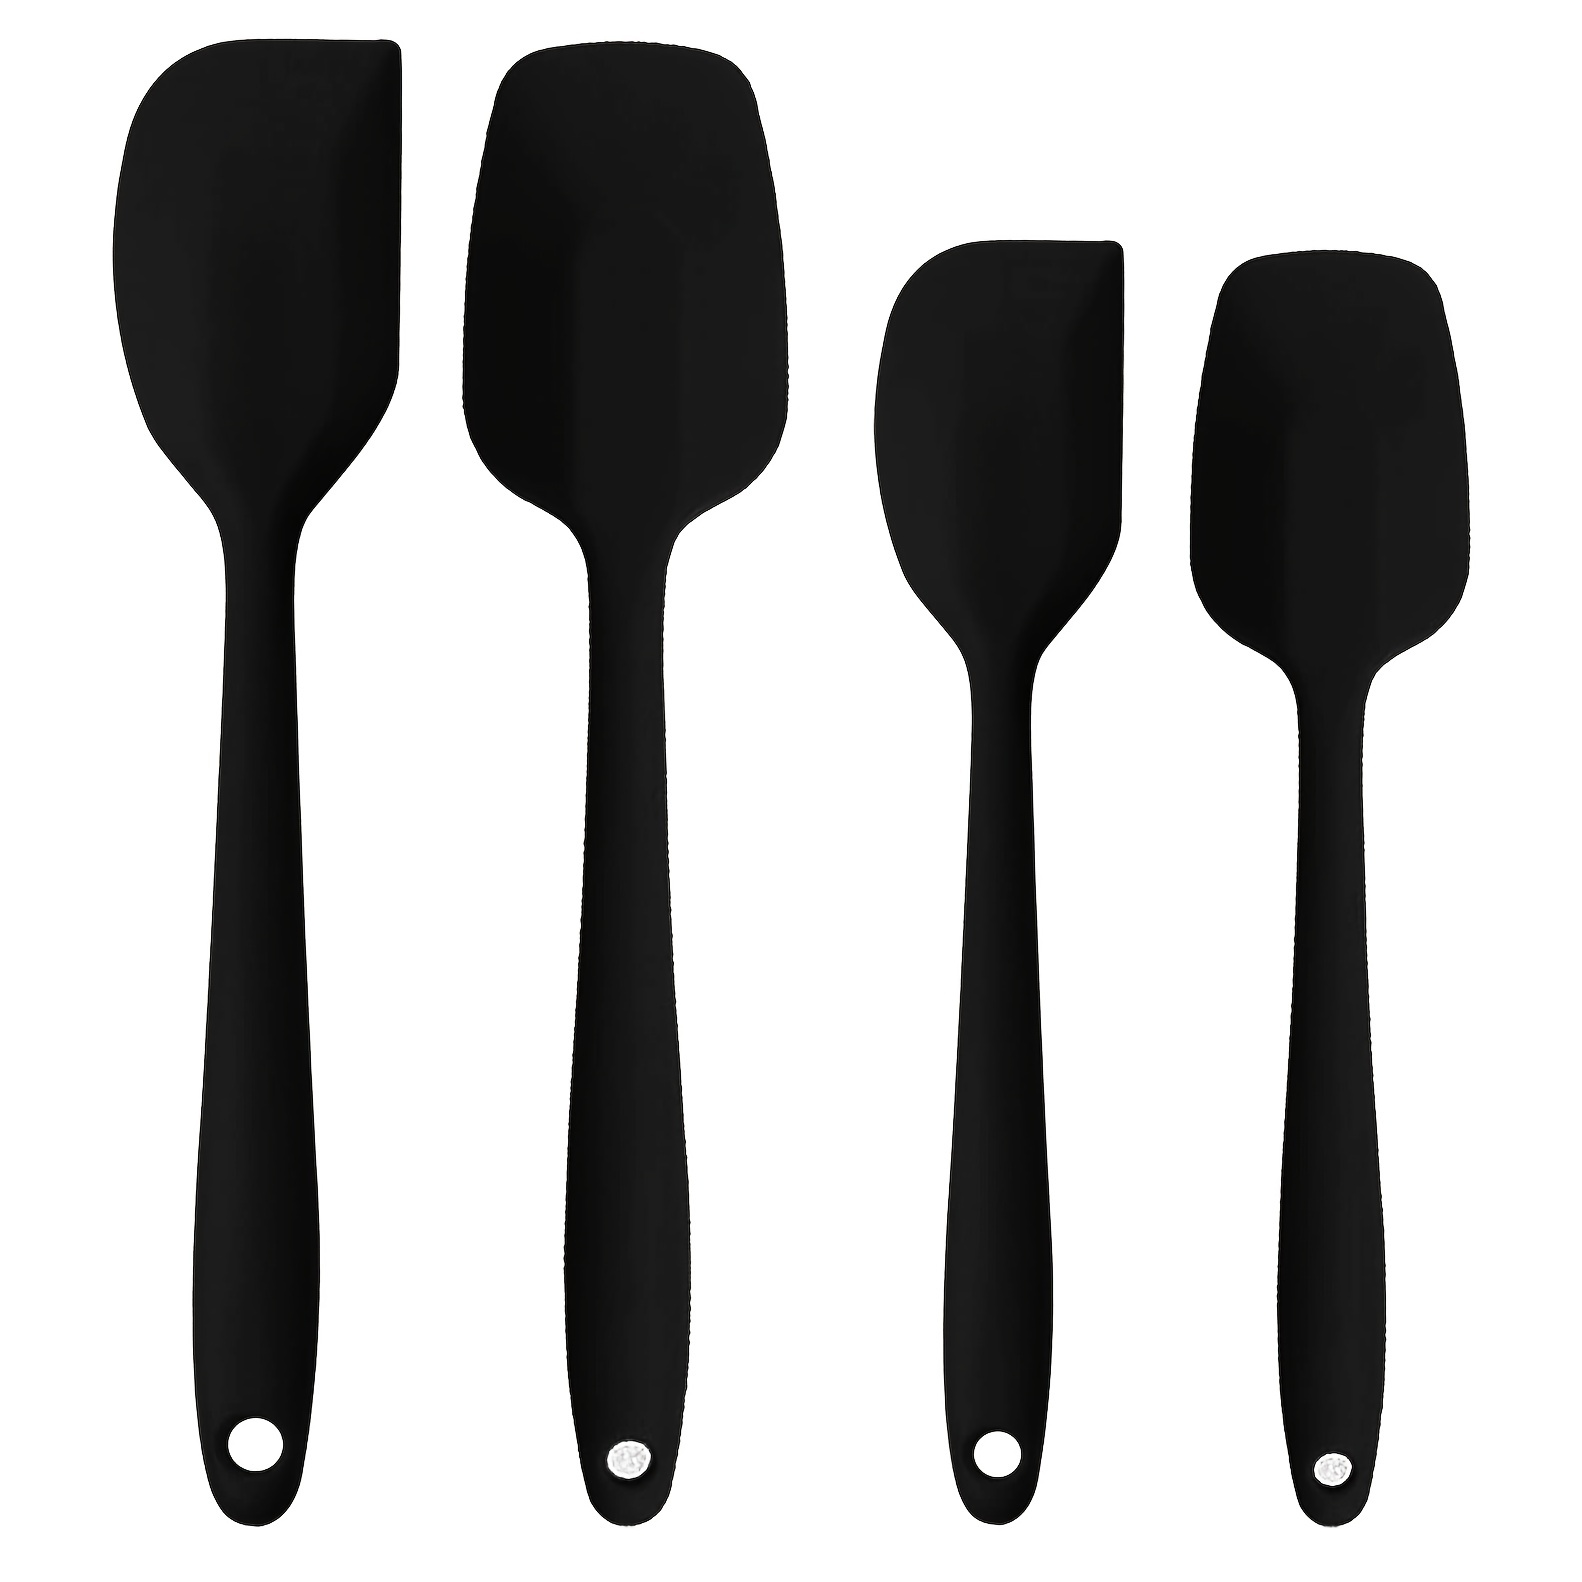 Set Of 6 Silicone Spatulas, , Heat Resistant And Non-stick Rubber Spatulas,  Seamless One-piece Design With Stainless Steel Core, Kitchen Utensils For  Cooking, Baking And Mixing